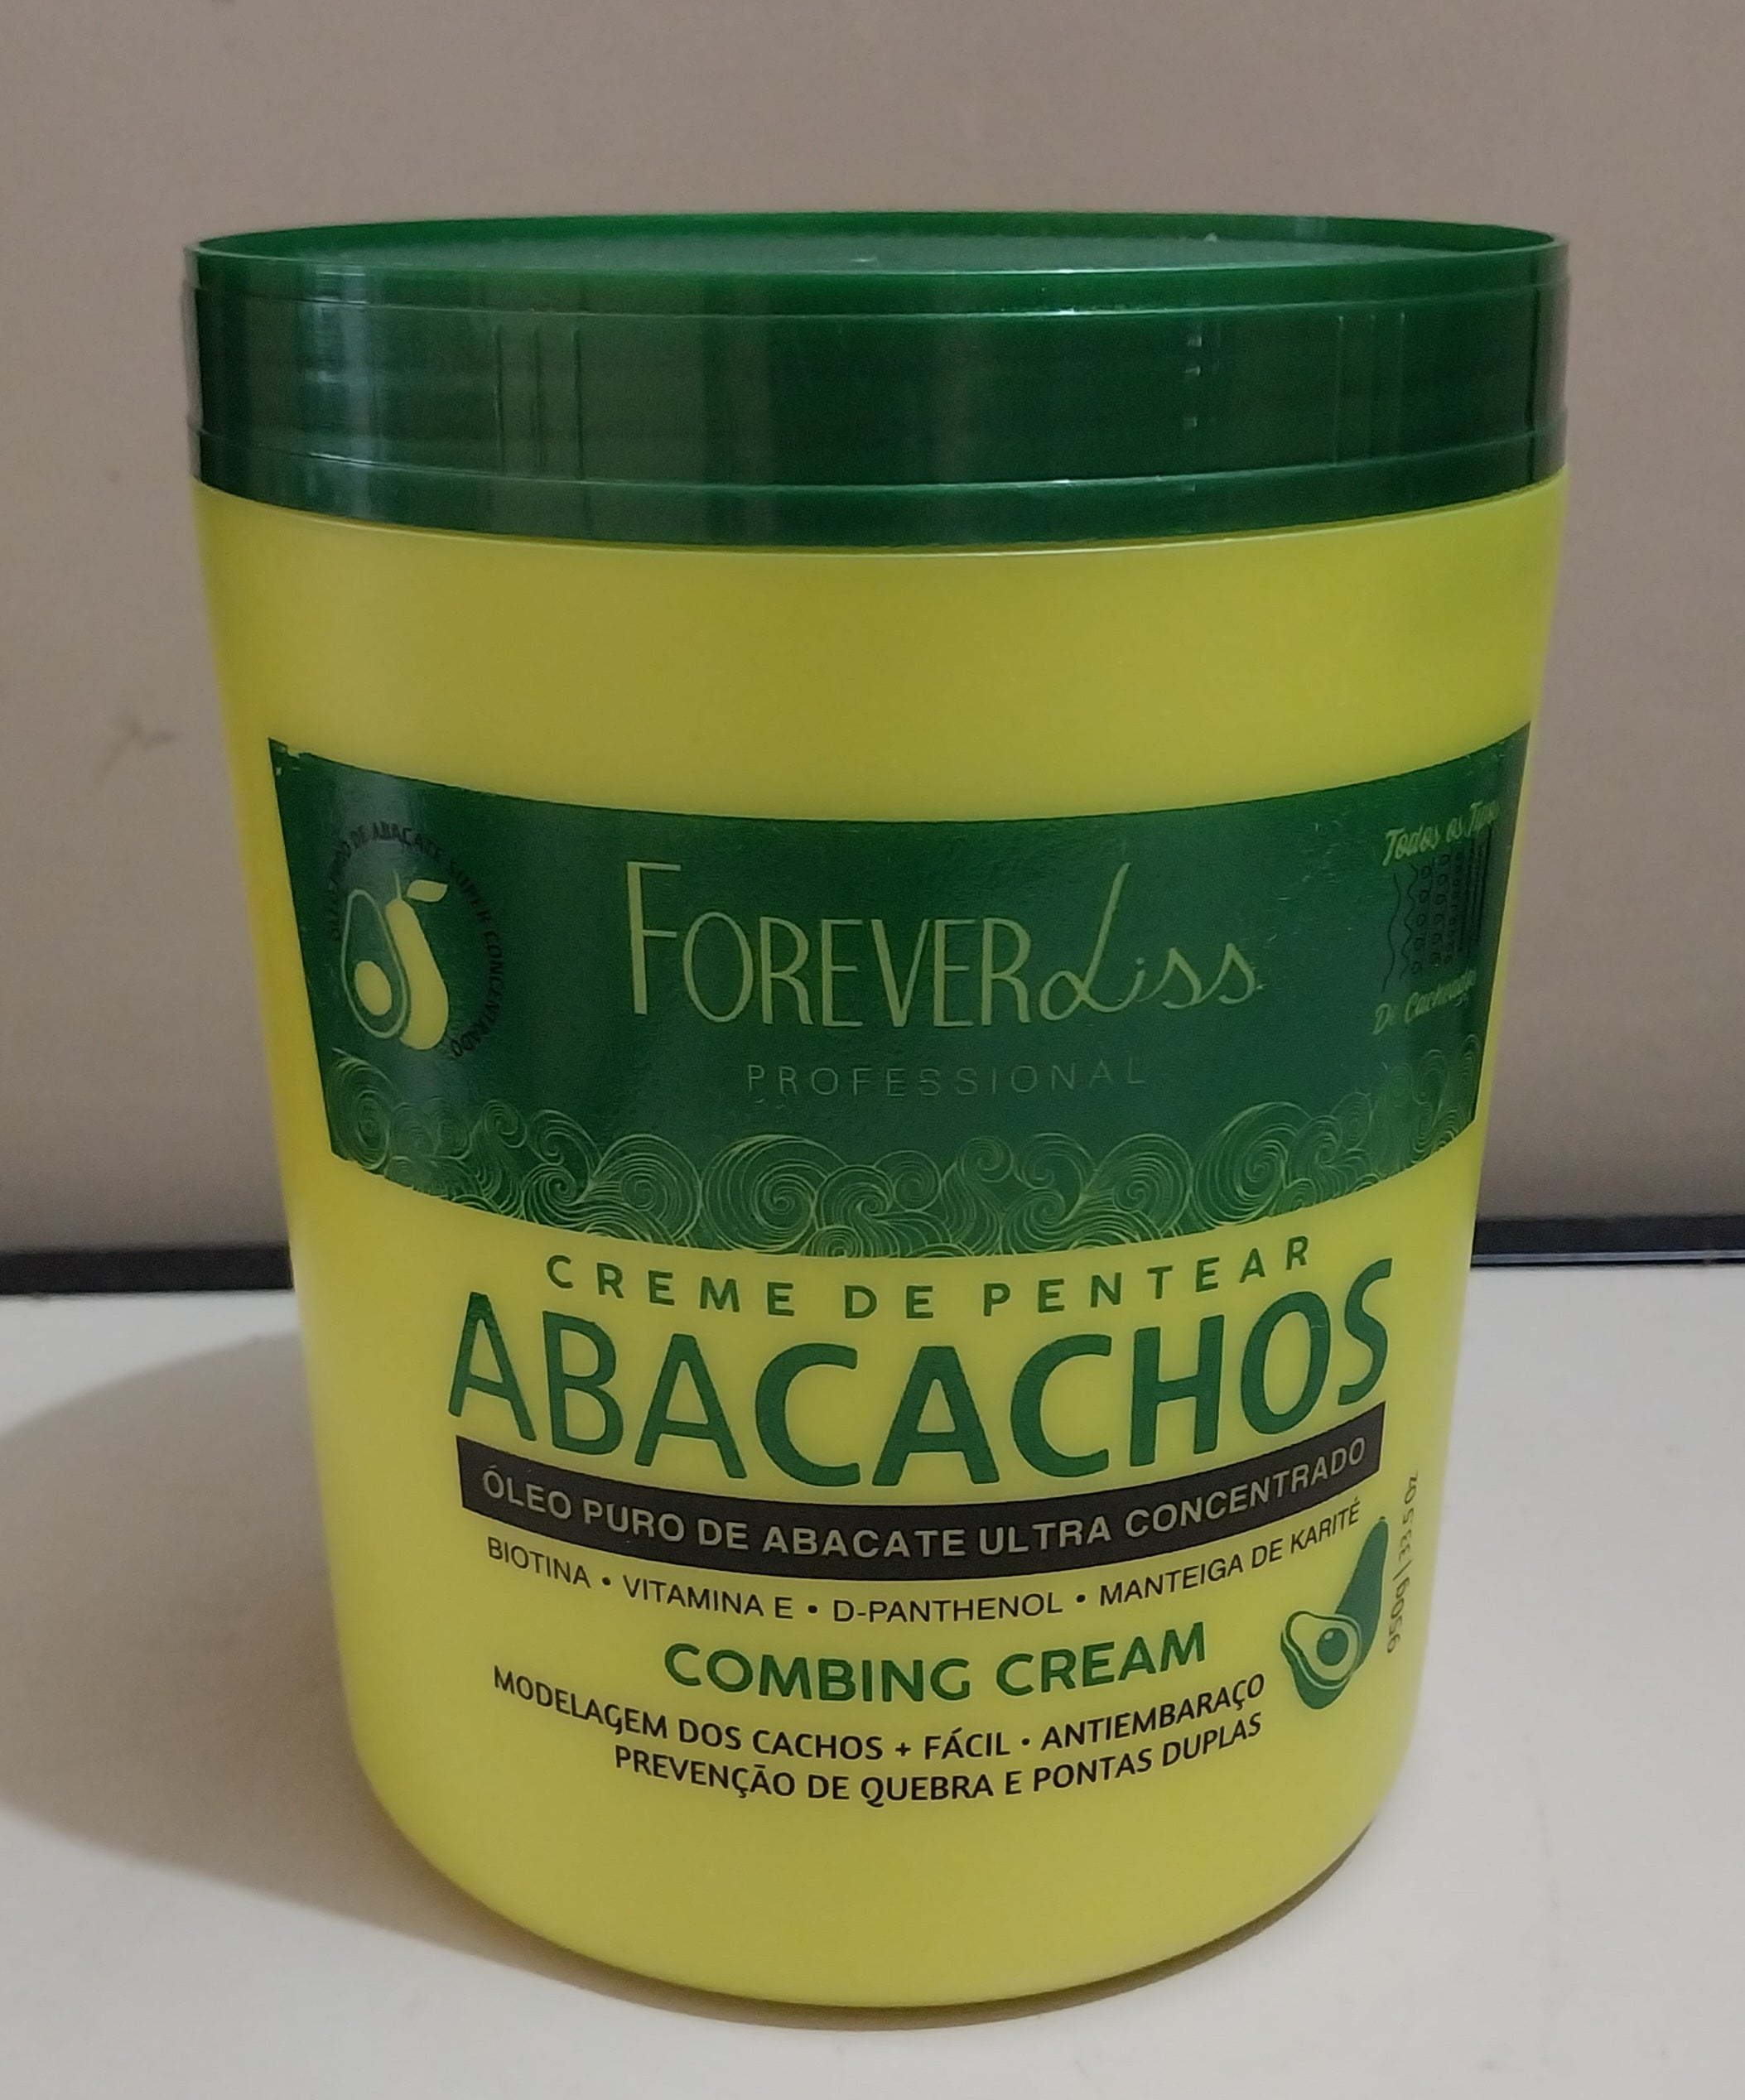 Forever Liss Abacachos Combing Cream 950g / 33.51 fl oz